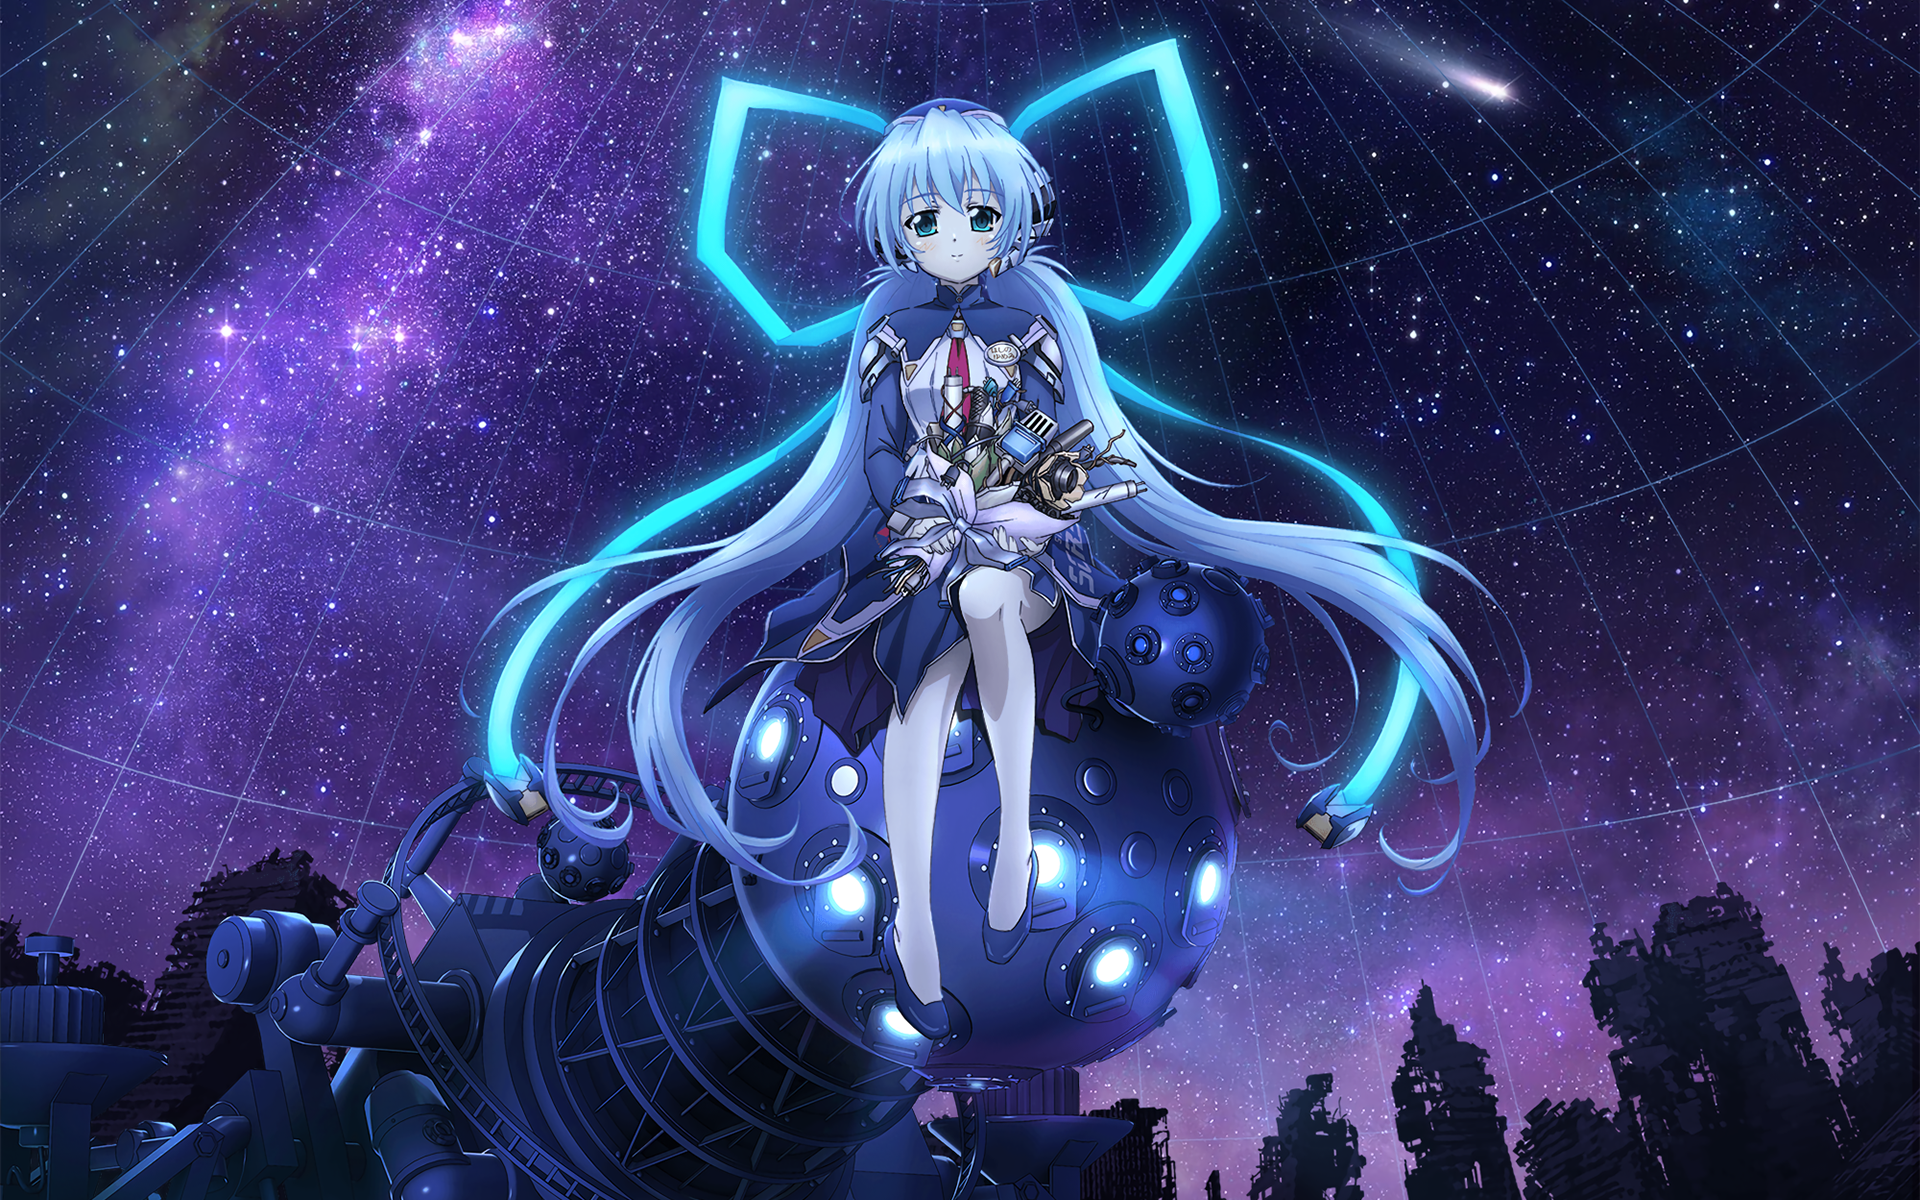 Planetarian: The Reverie Of A Little Planet #19